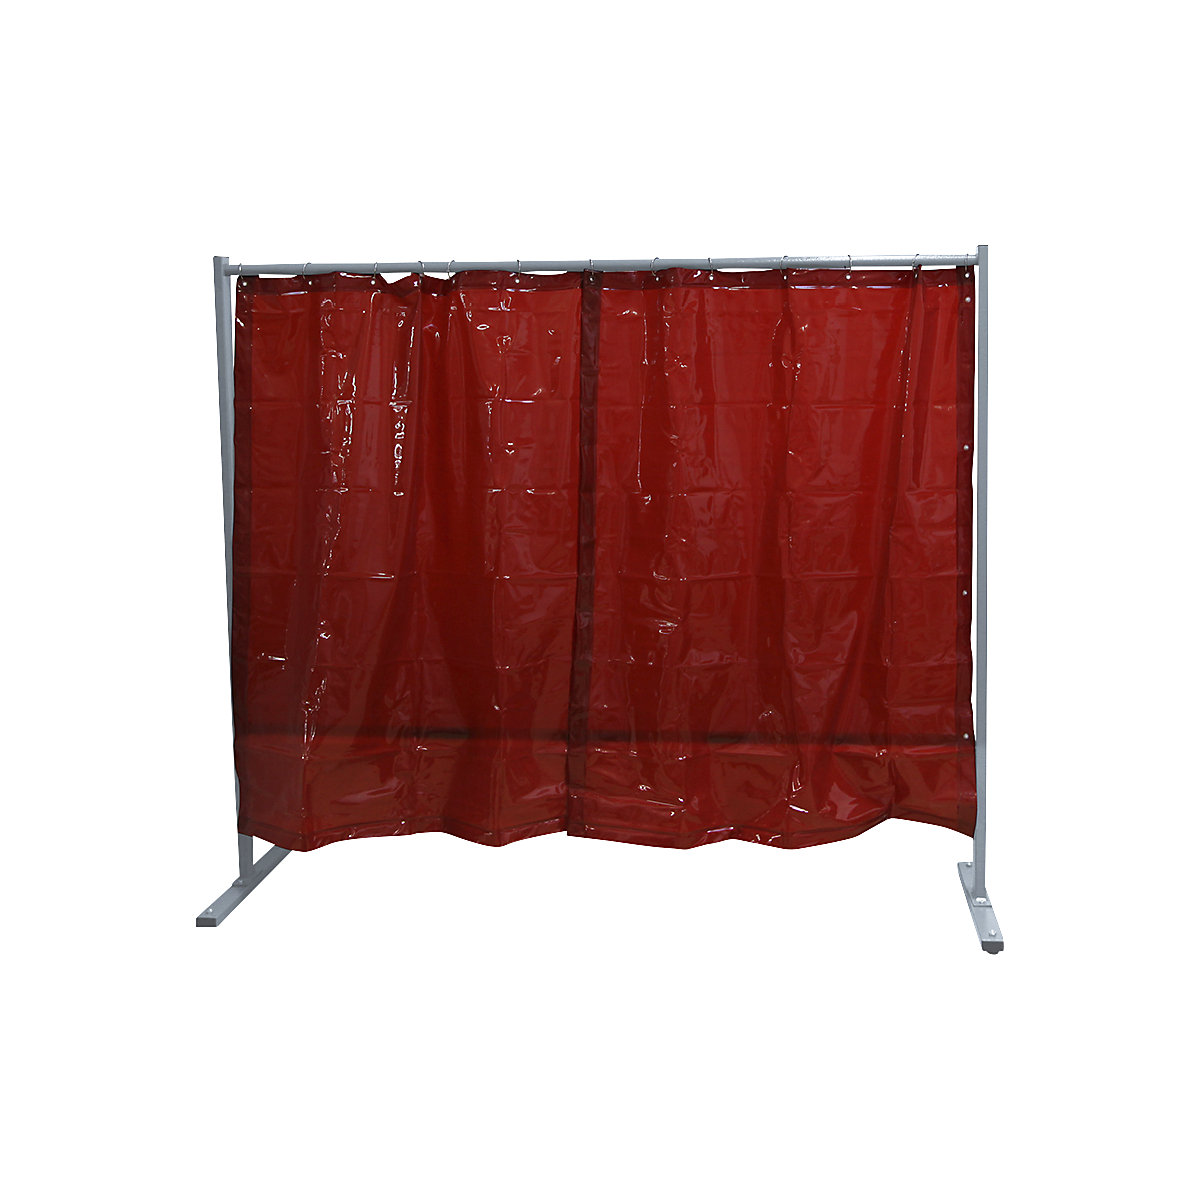 Mobile welding protection screen, single unit design, HxW 1900 x 2100 mm, with welding protection film, red